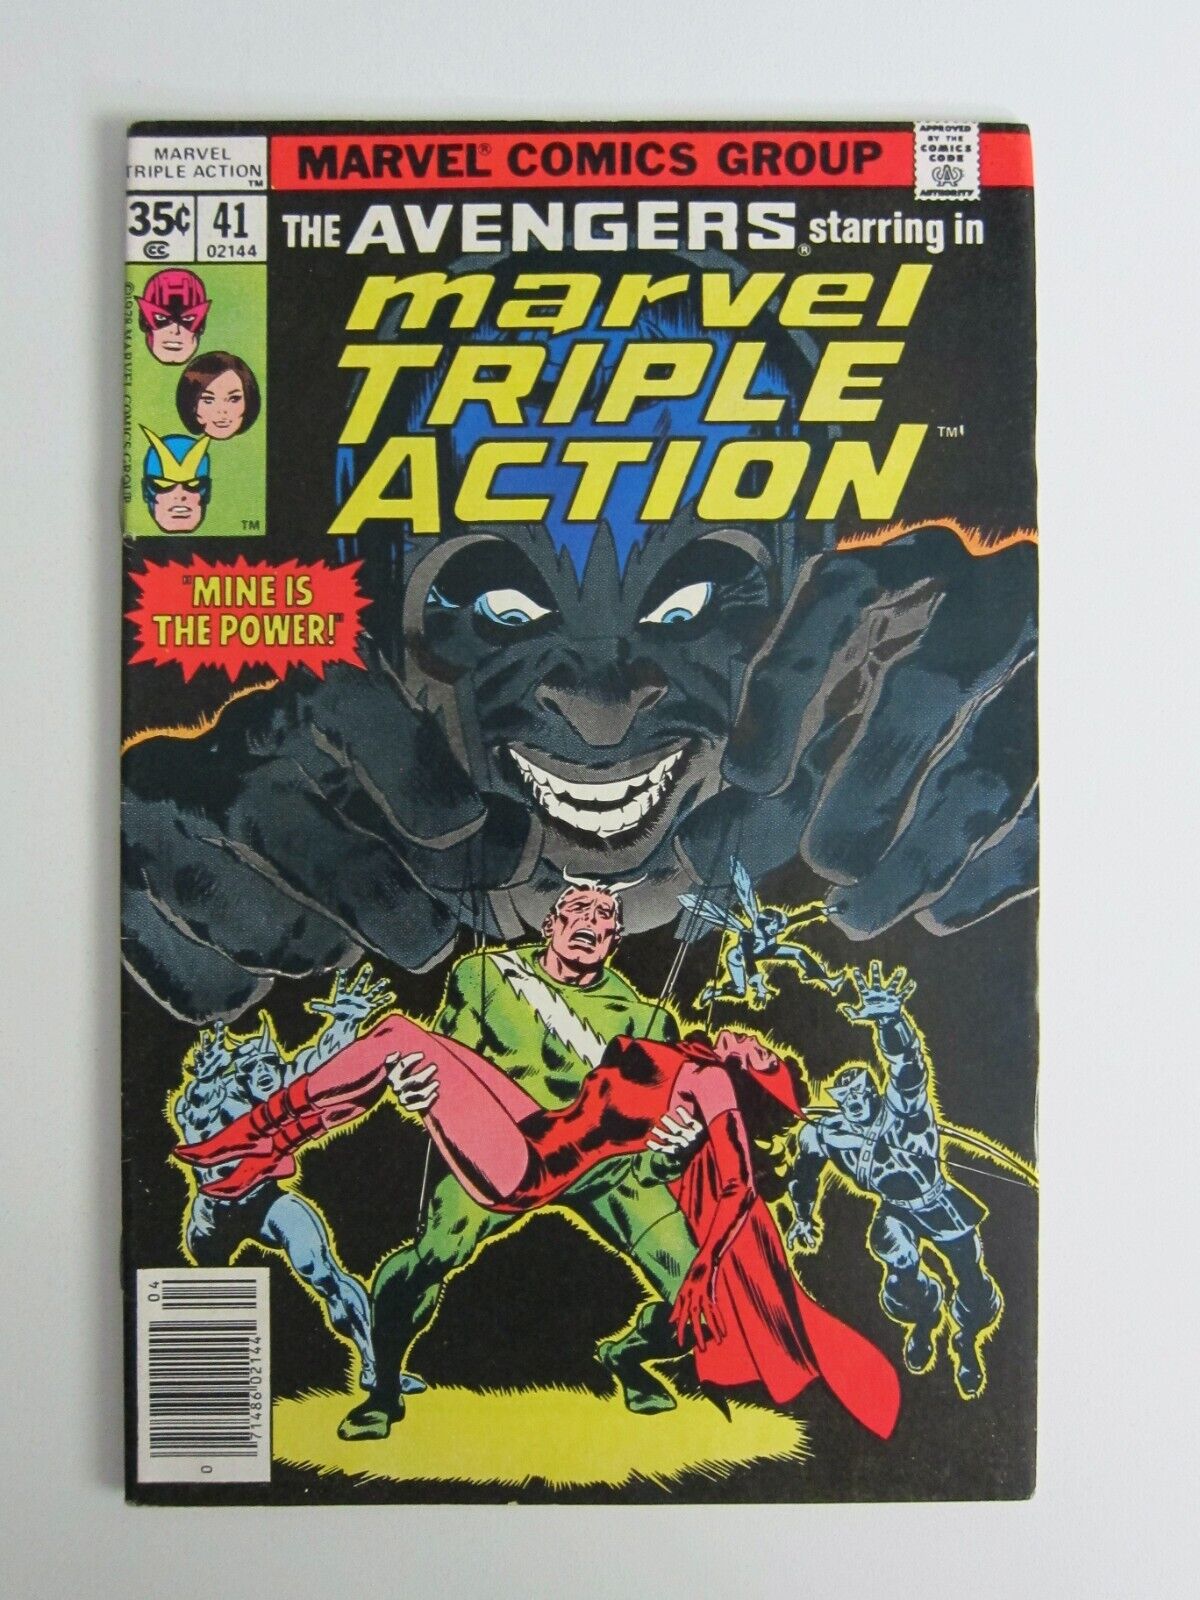 MARVEL TRIPLE ACTION #41 FN- 1978 AVENGERS SCARLET WITCH MAGNETO QUICKSILVER MCU